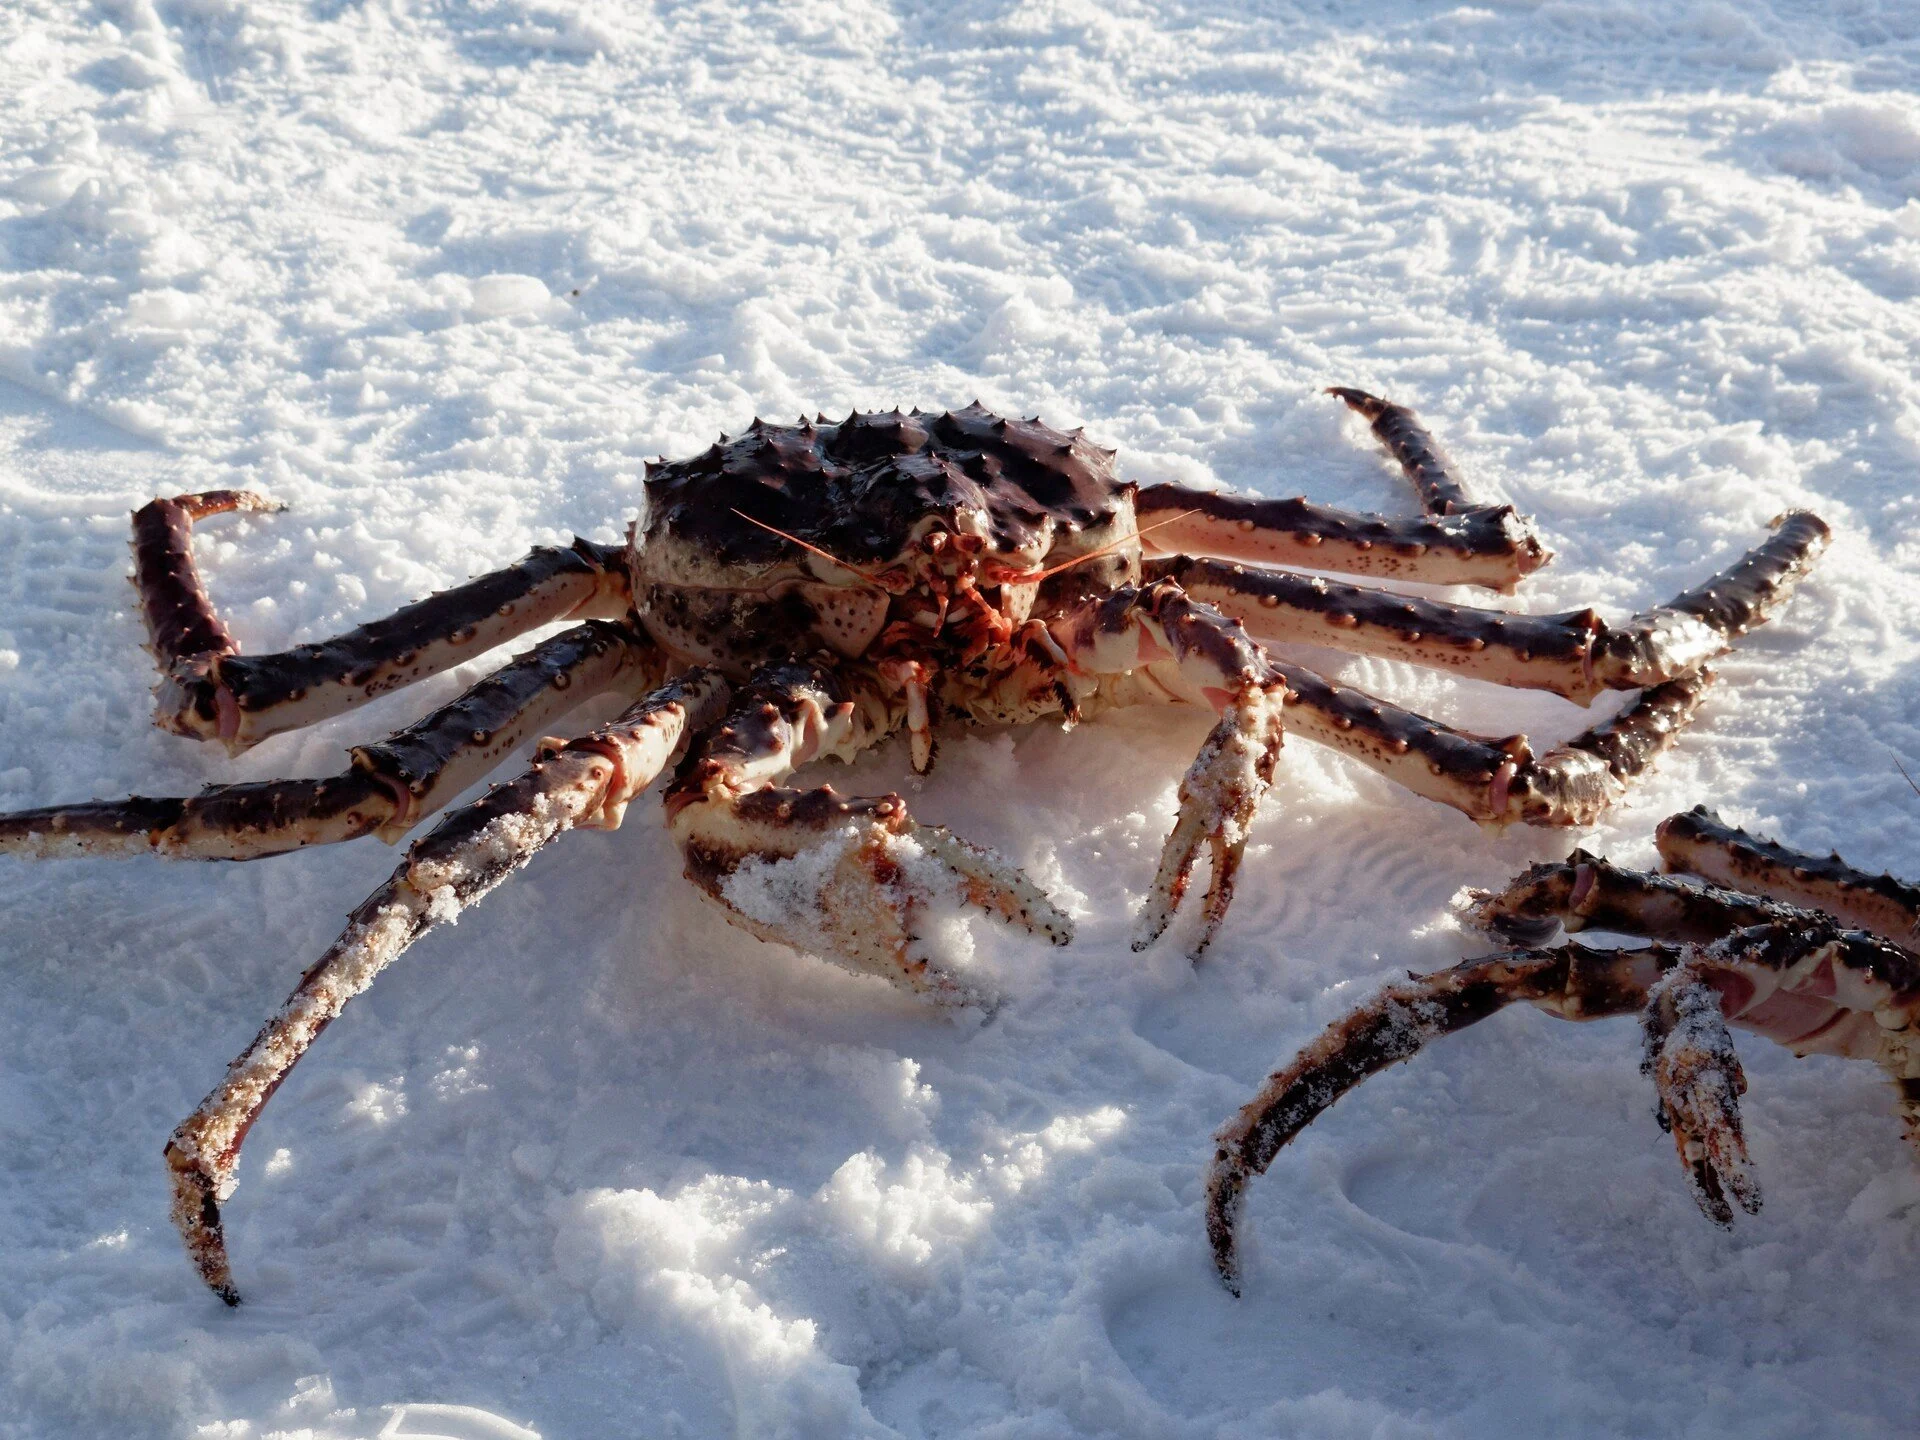 king-crab-norway-hgr-99879_1920-photo_photo_competition